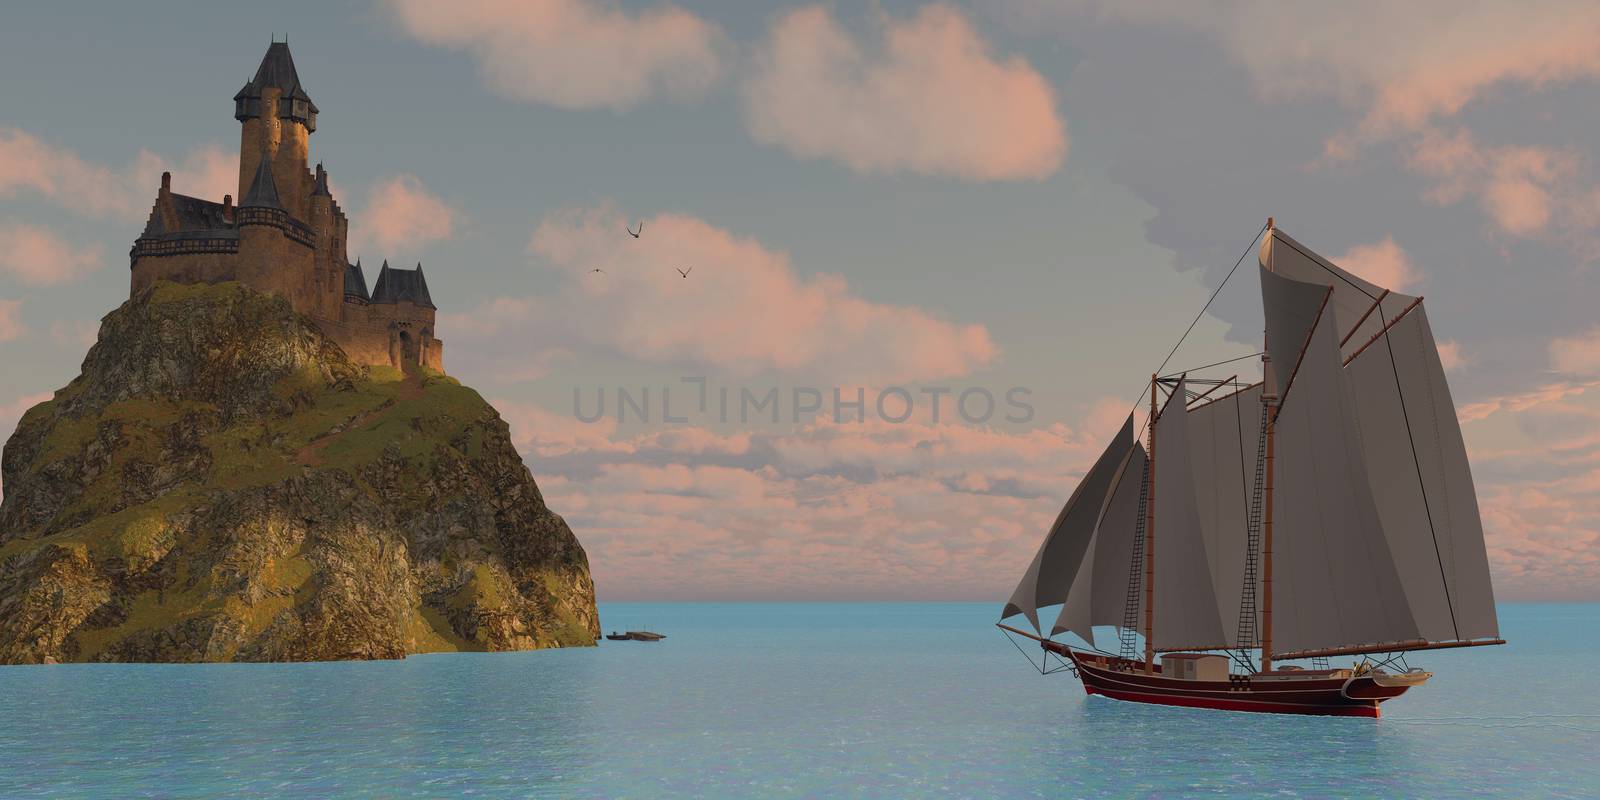 Lake Schooner and Castle by Catmando